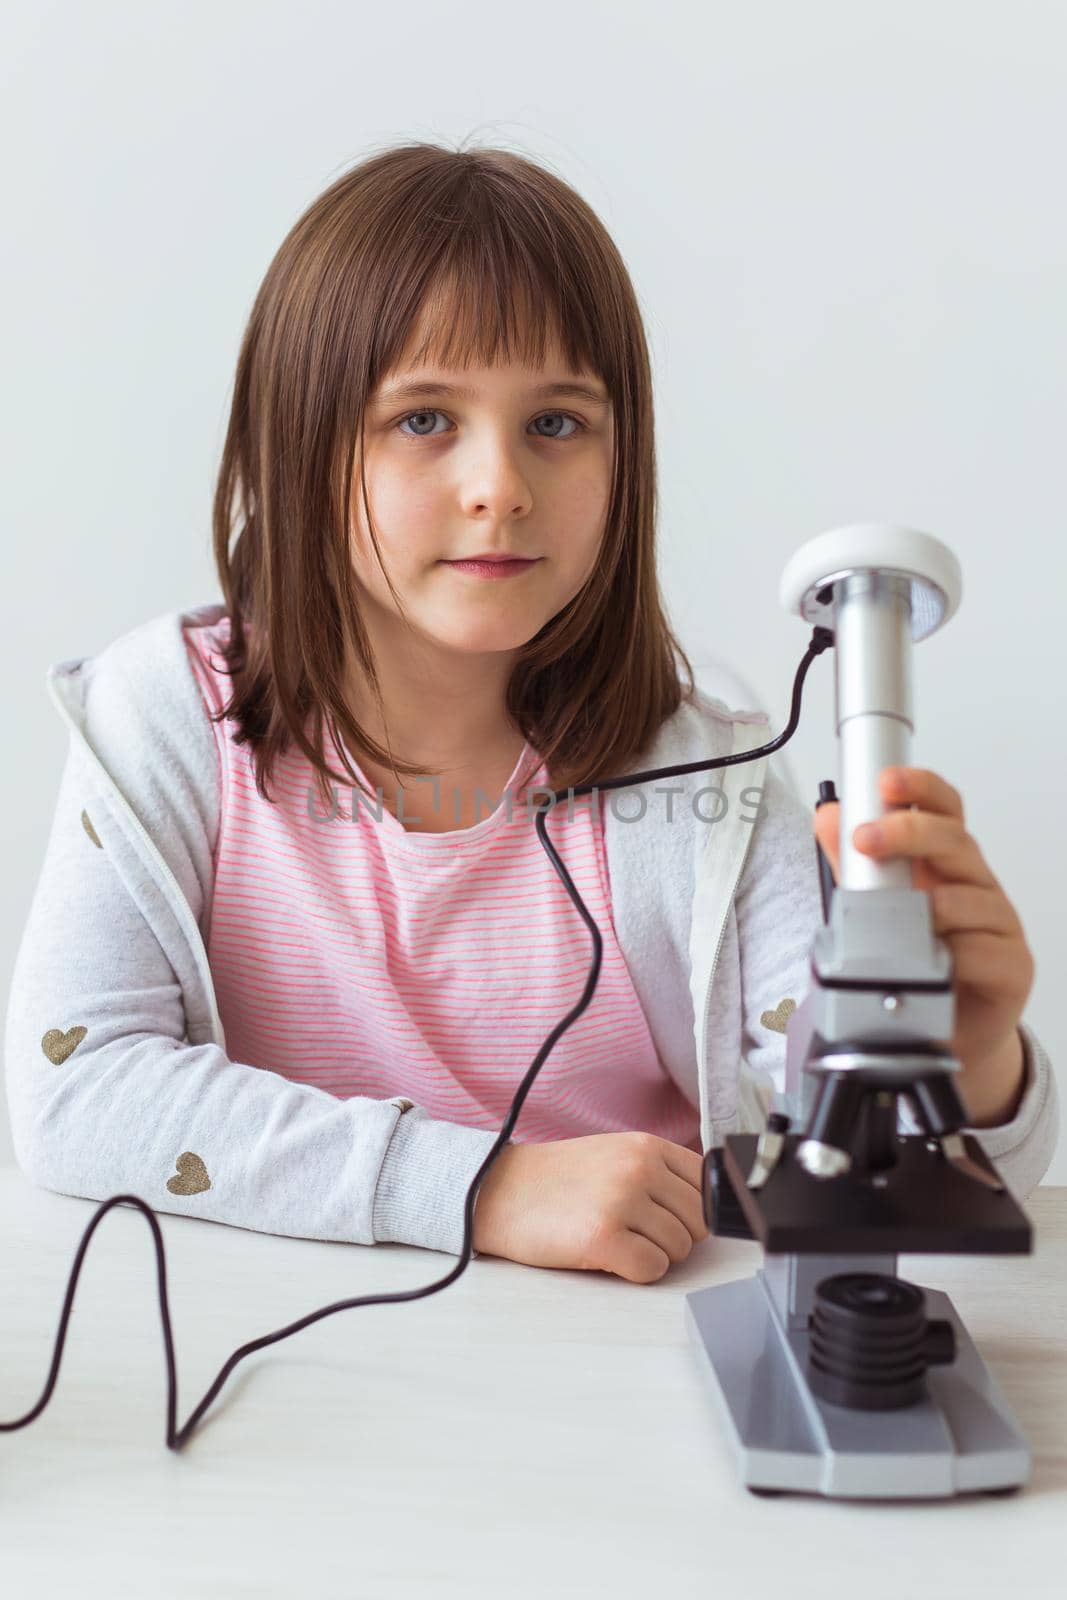 Child girl in science class using digital microscope. Technologies, children and learning concept. by Satura86